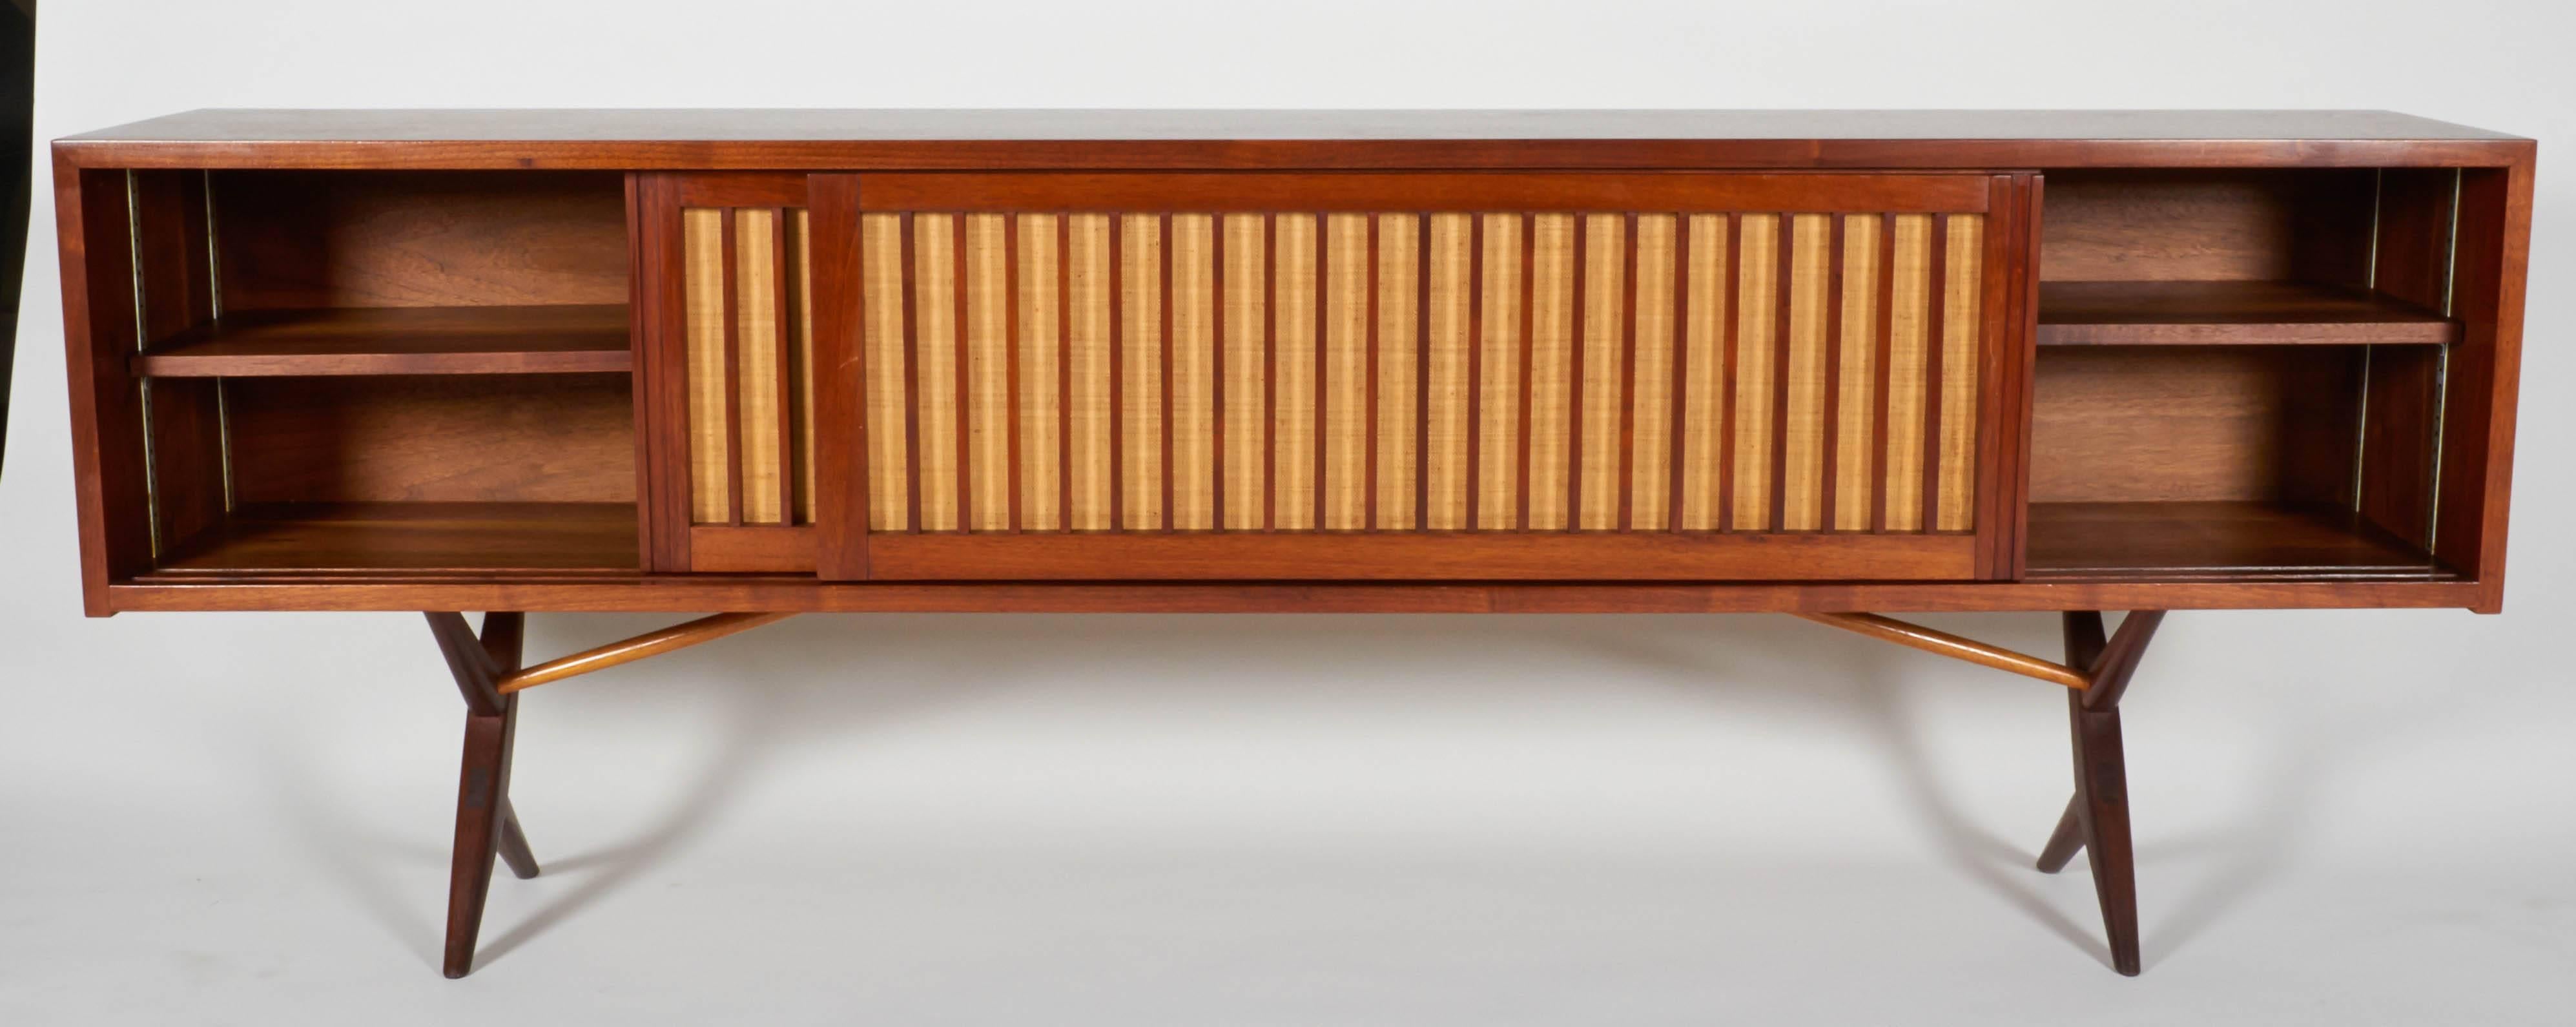 This piece has amazing proportions and all of the qualities of George Nakashima's fine craftsmanship.